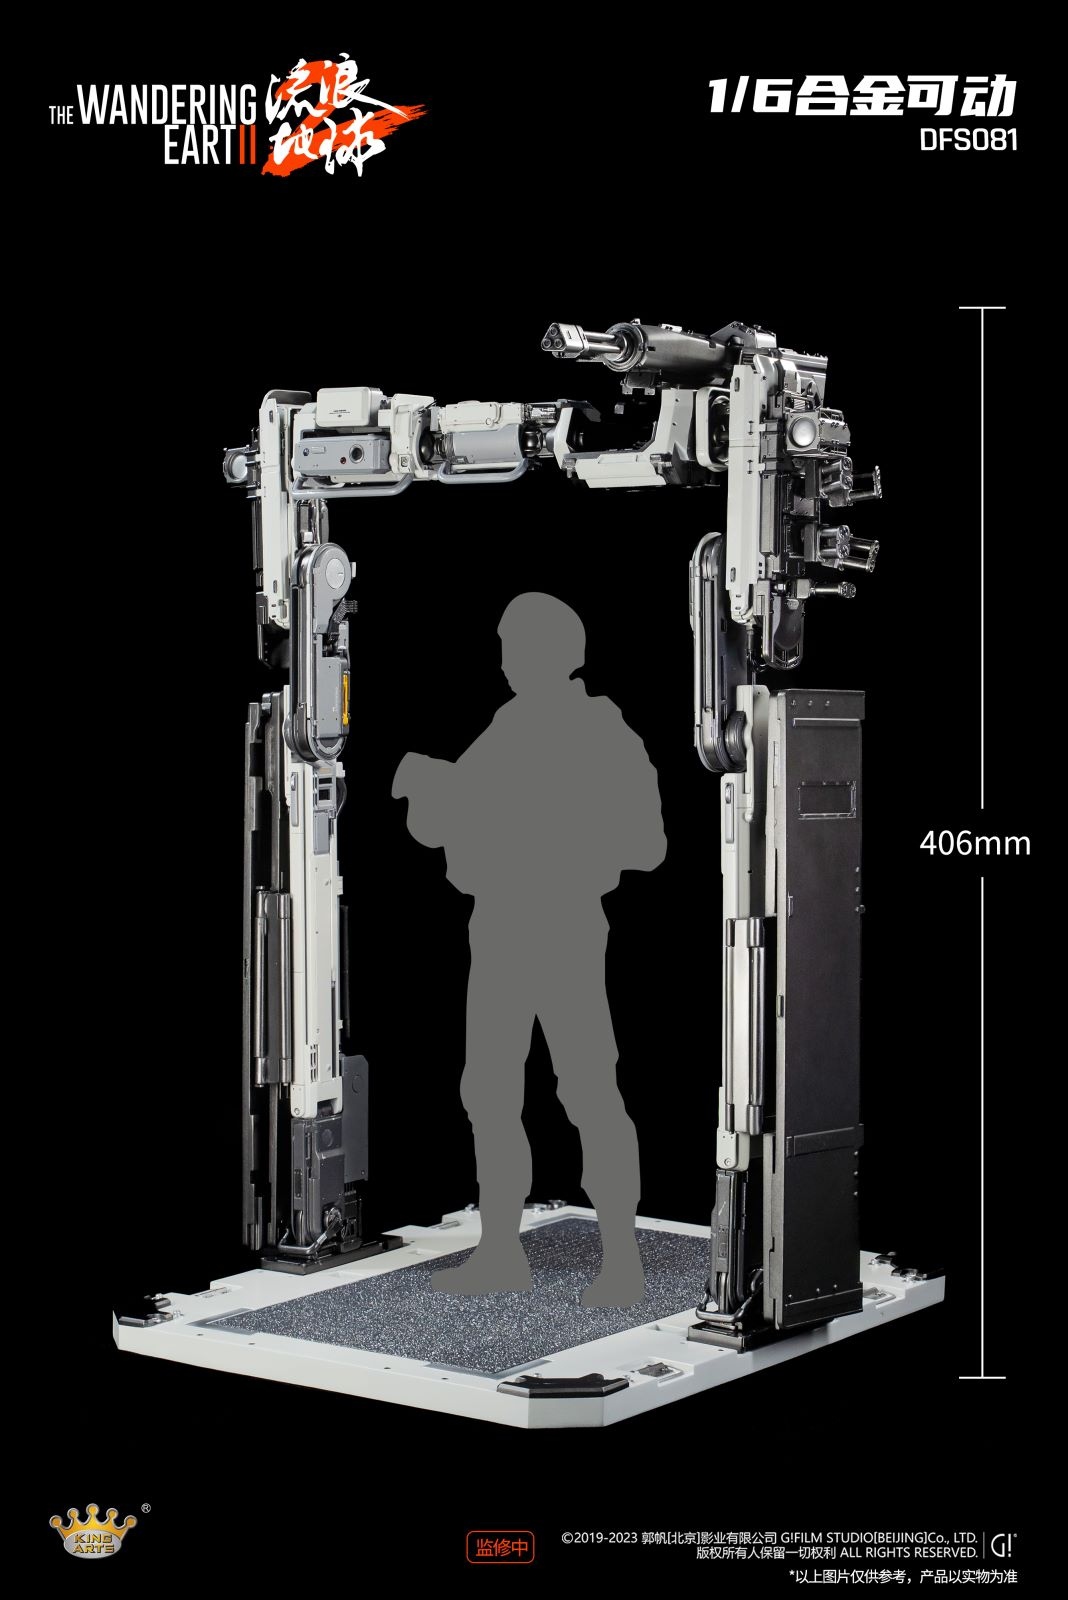 Robot - NEW PRODUCT: King Arts - "The Wandering Earth 2" Genuine Authorization - Alloy Movable Doorframe Robot (Regular Version/Armed Version) 3126